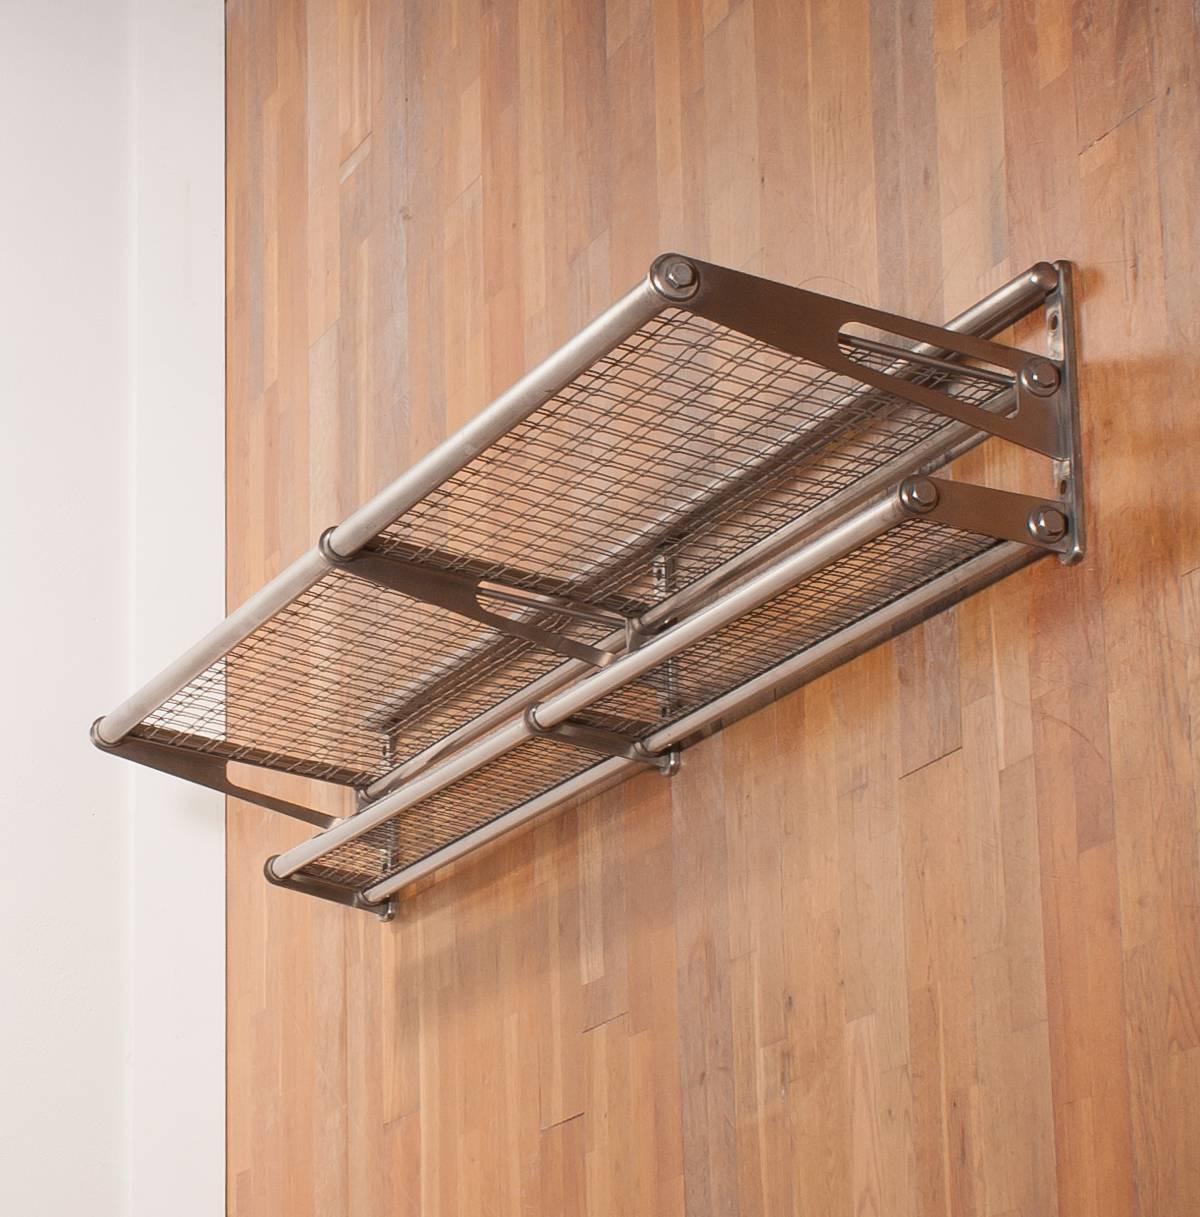 Beautiful wall-mounted luggage rack.
This rack is made of stainless steel.
It is coming out of a train compartment.
You can use the rack as a coatrack or as a bookshelf, but it looks also great in your kitchen for your pots and pans and even in